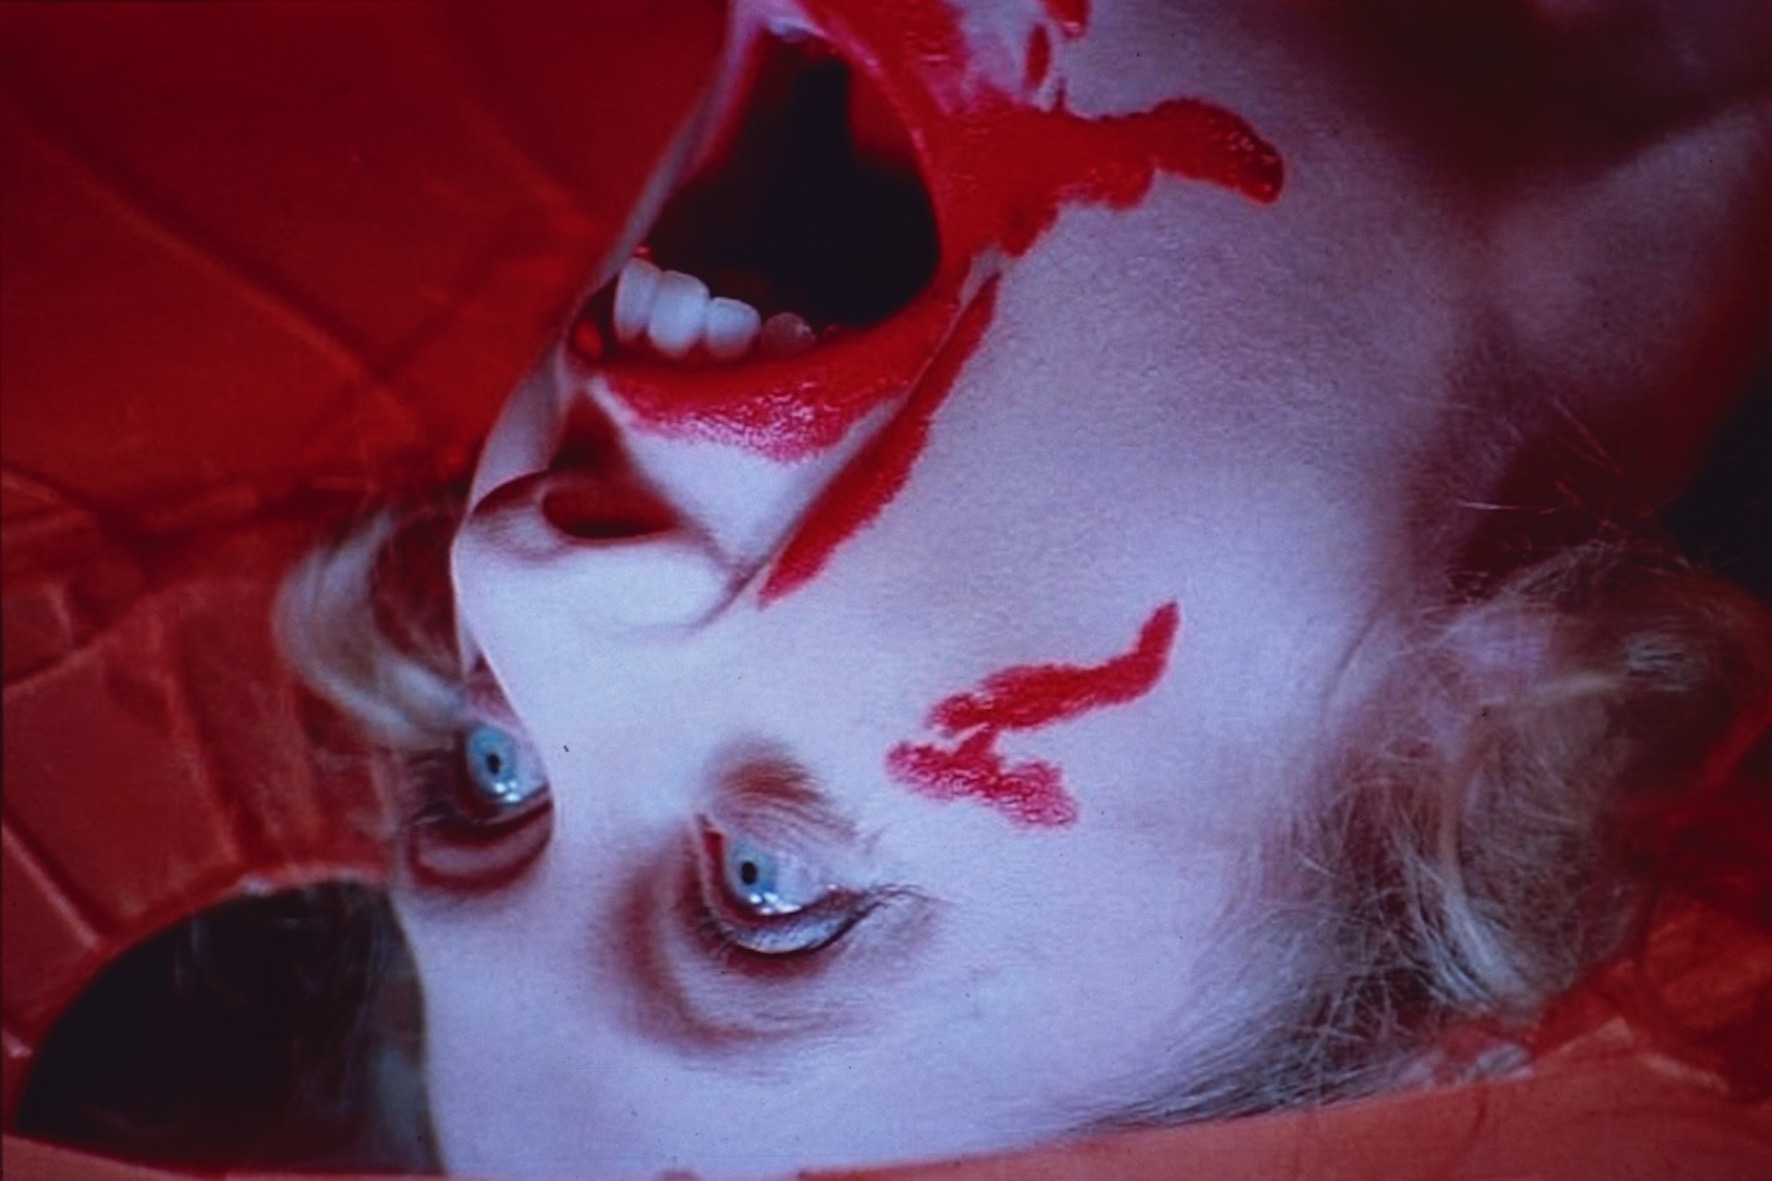 A still from Suspiria, a woman throws her head backwards, the screen drenched in kitsch red blood